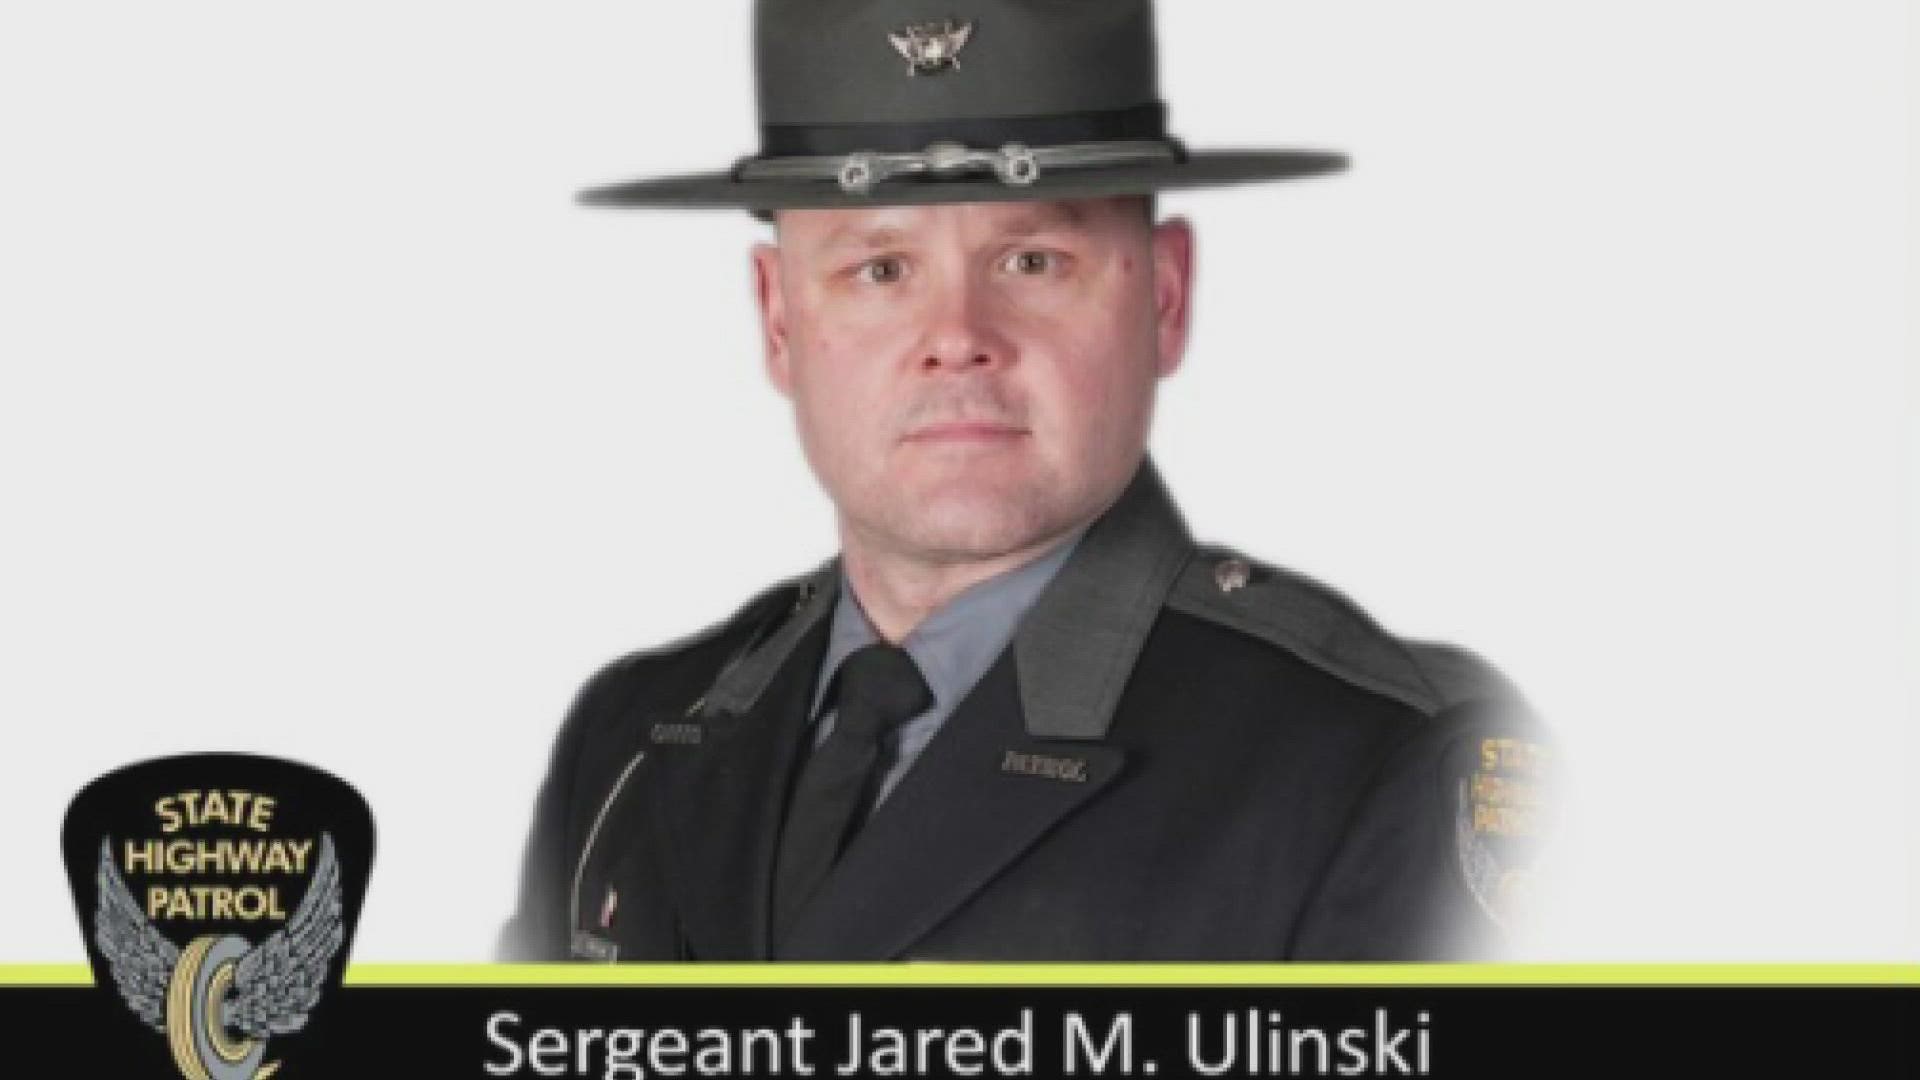 Sgt. Jared Ulinski of the Ohio State Highway Patrol died of a self-inflicted gunshot wound while on duty on July 31st.